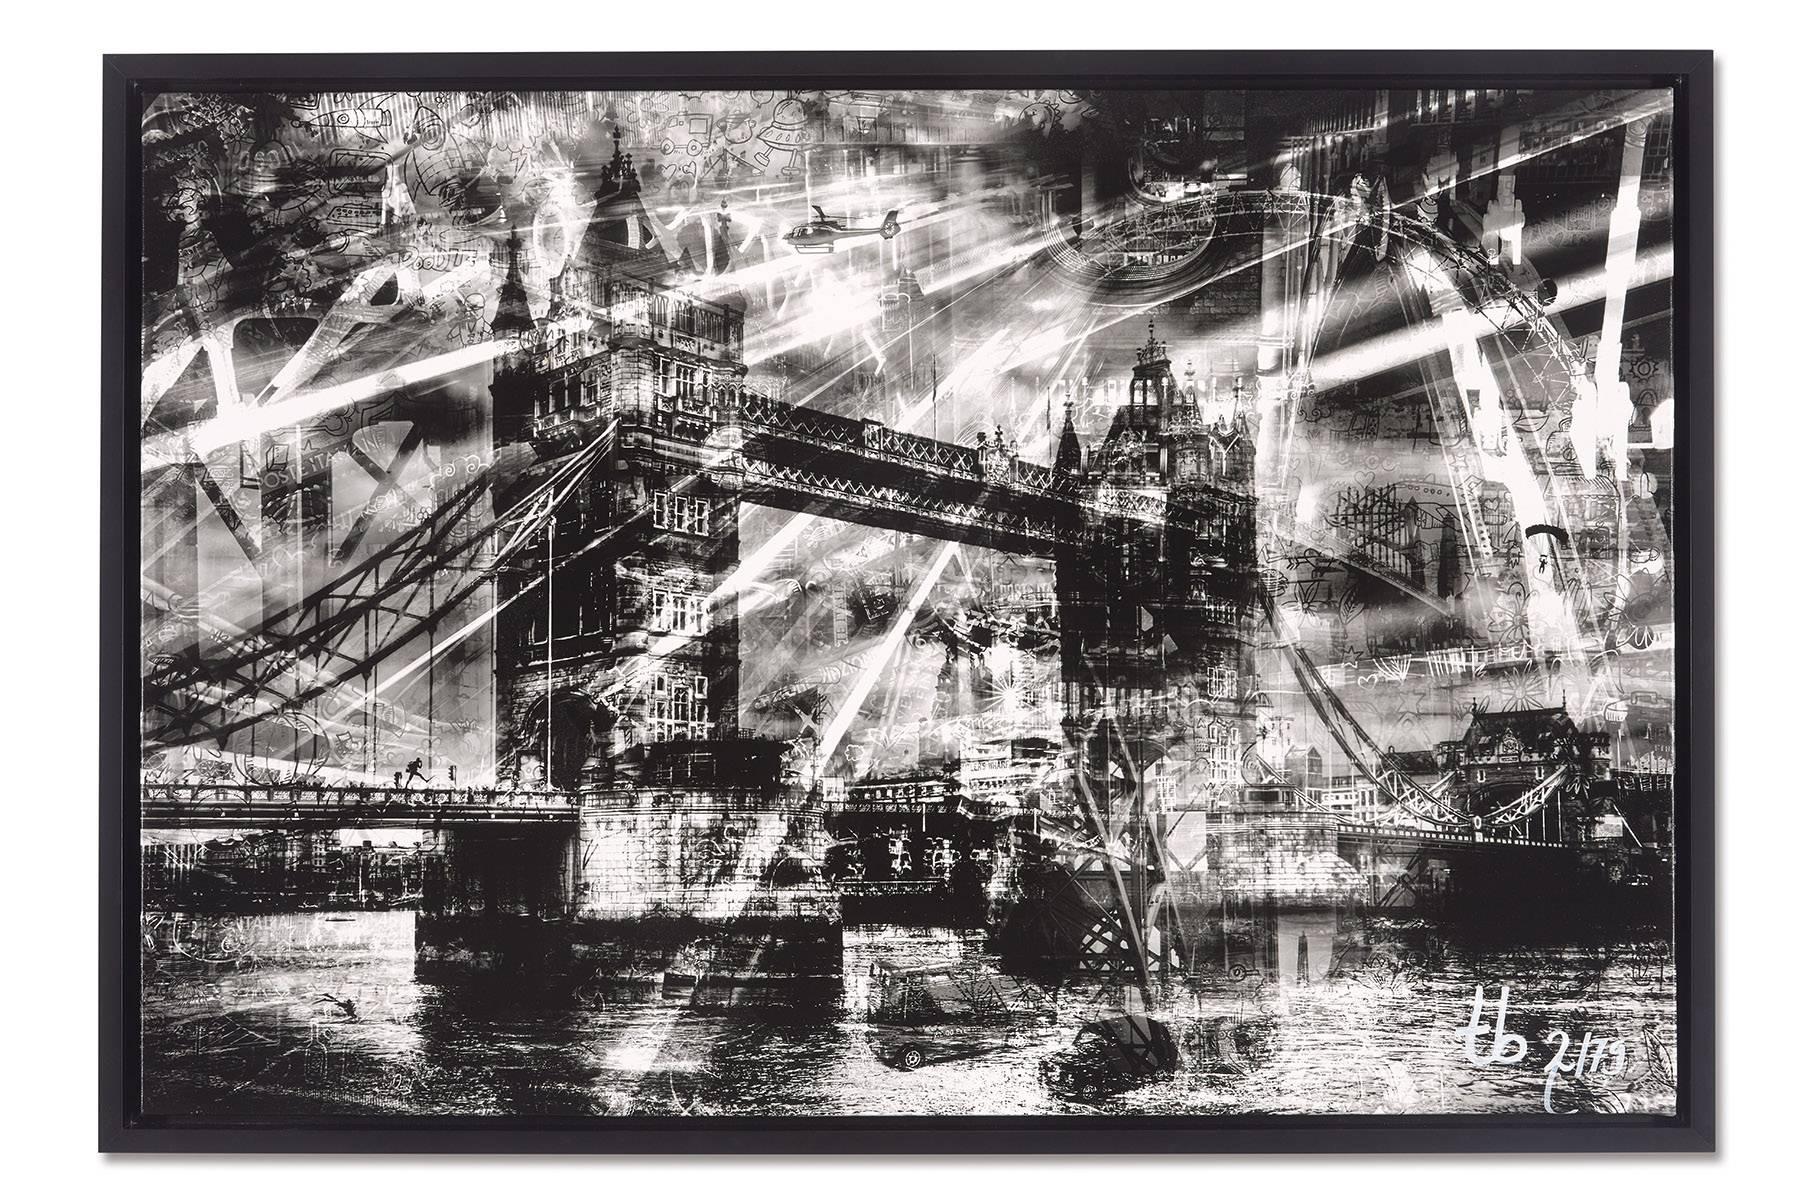 London Shadows - Framed Fine Art Limited Edition of 149 - Photograph by Thomas Bijen